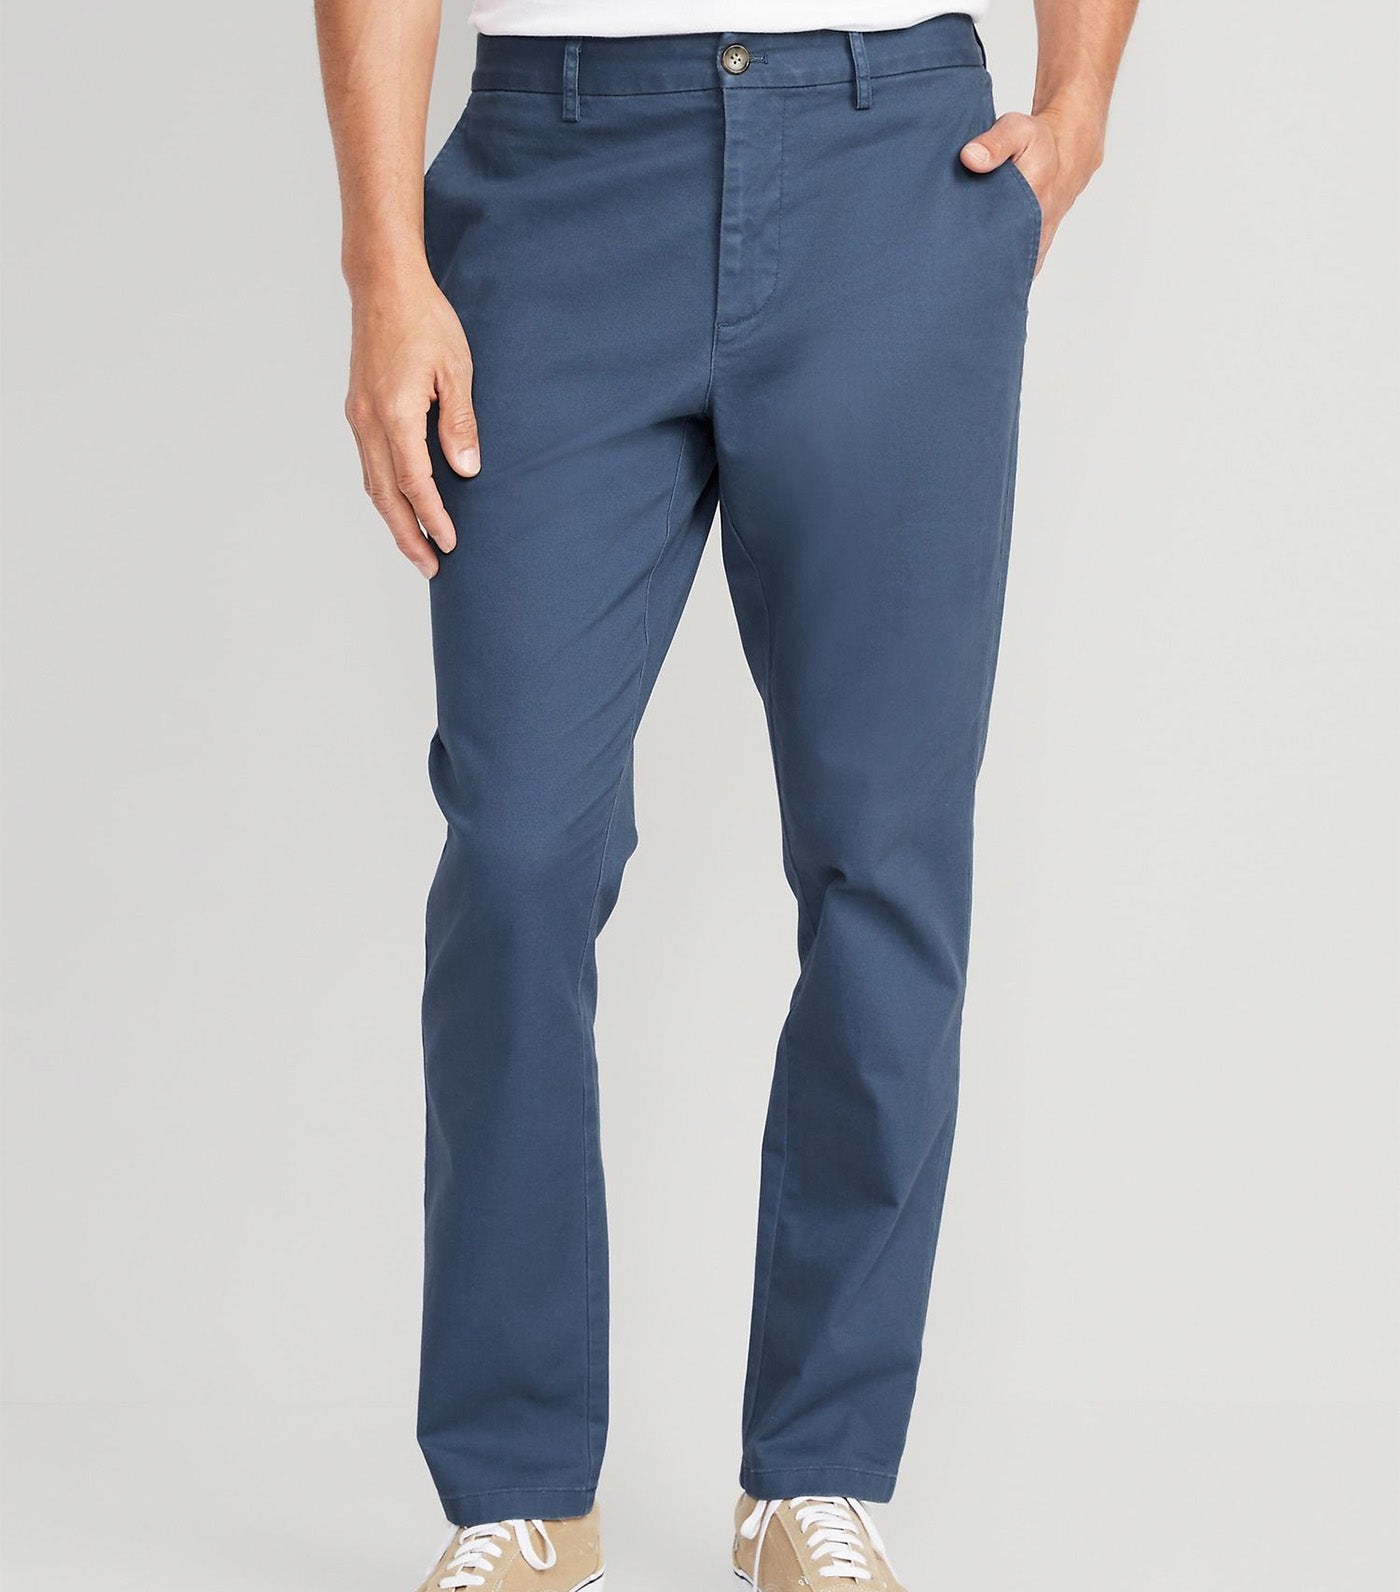 Old Navy Straight Ultimate Tech Built-In Flex Chino Pants for Men